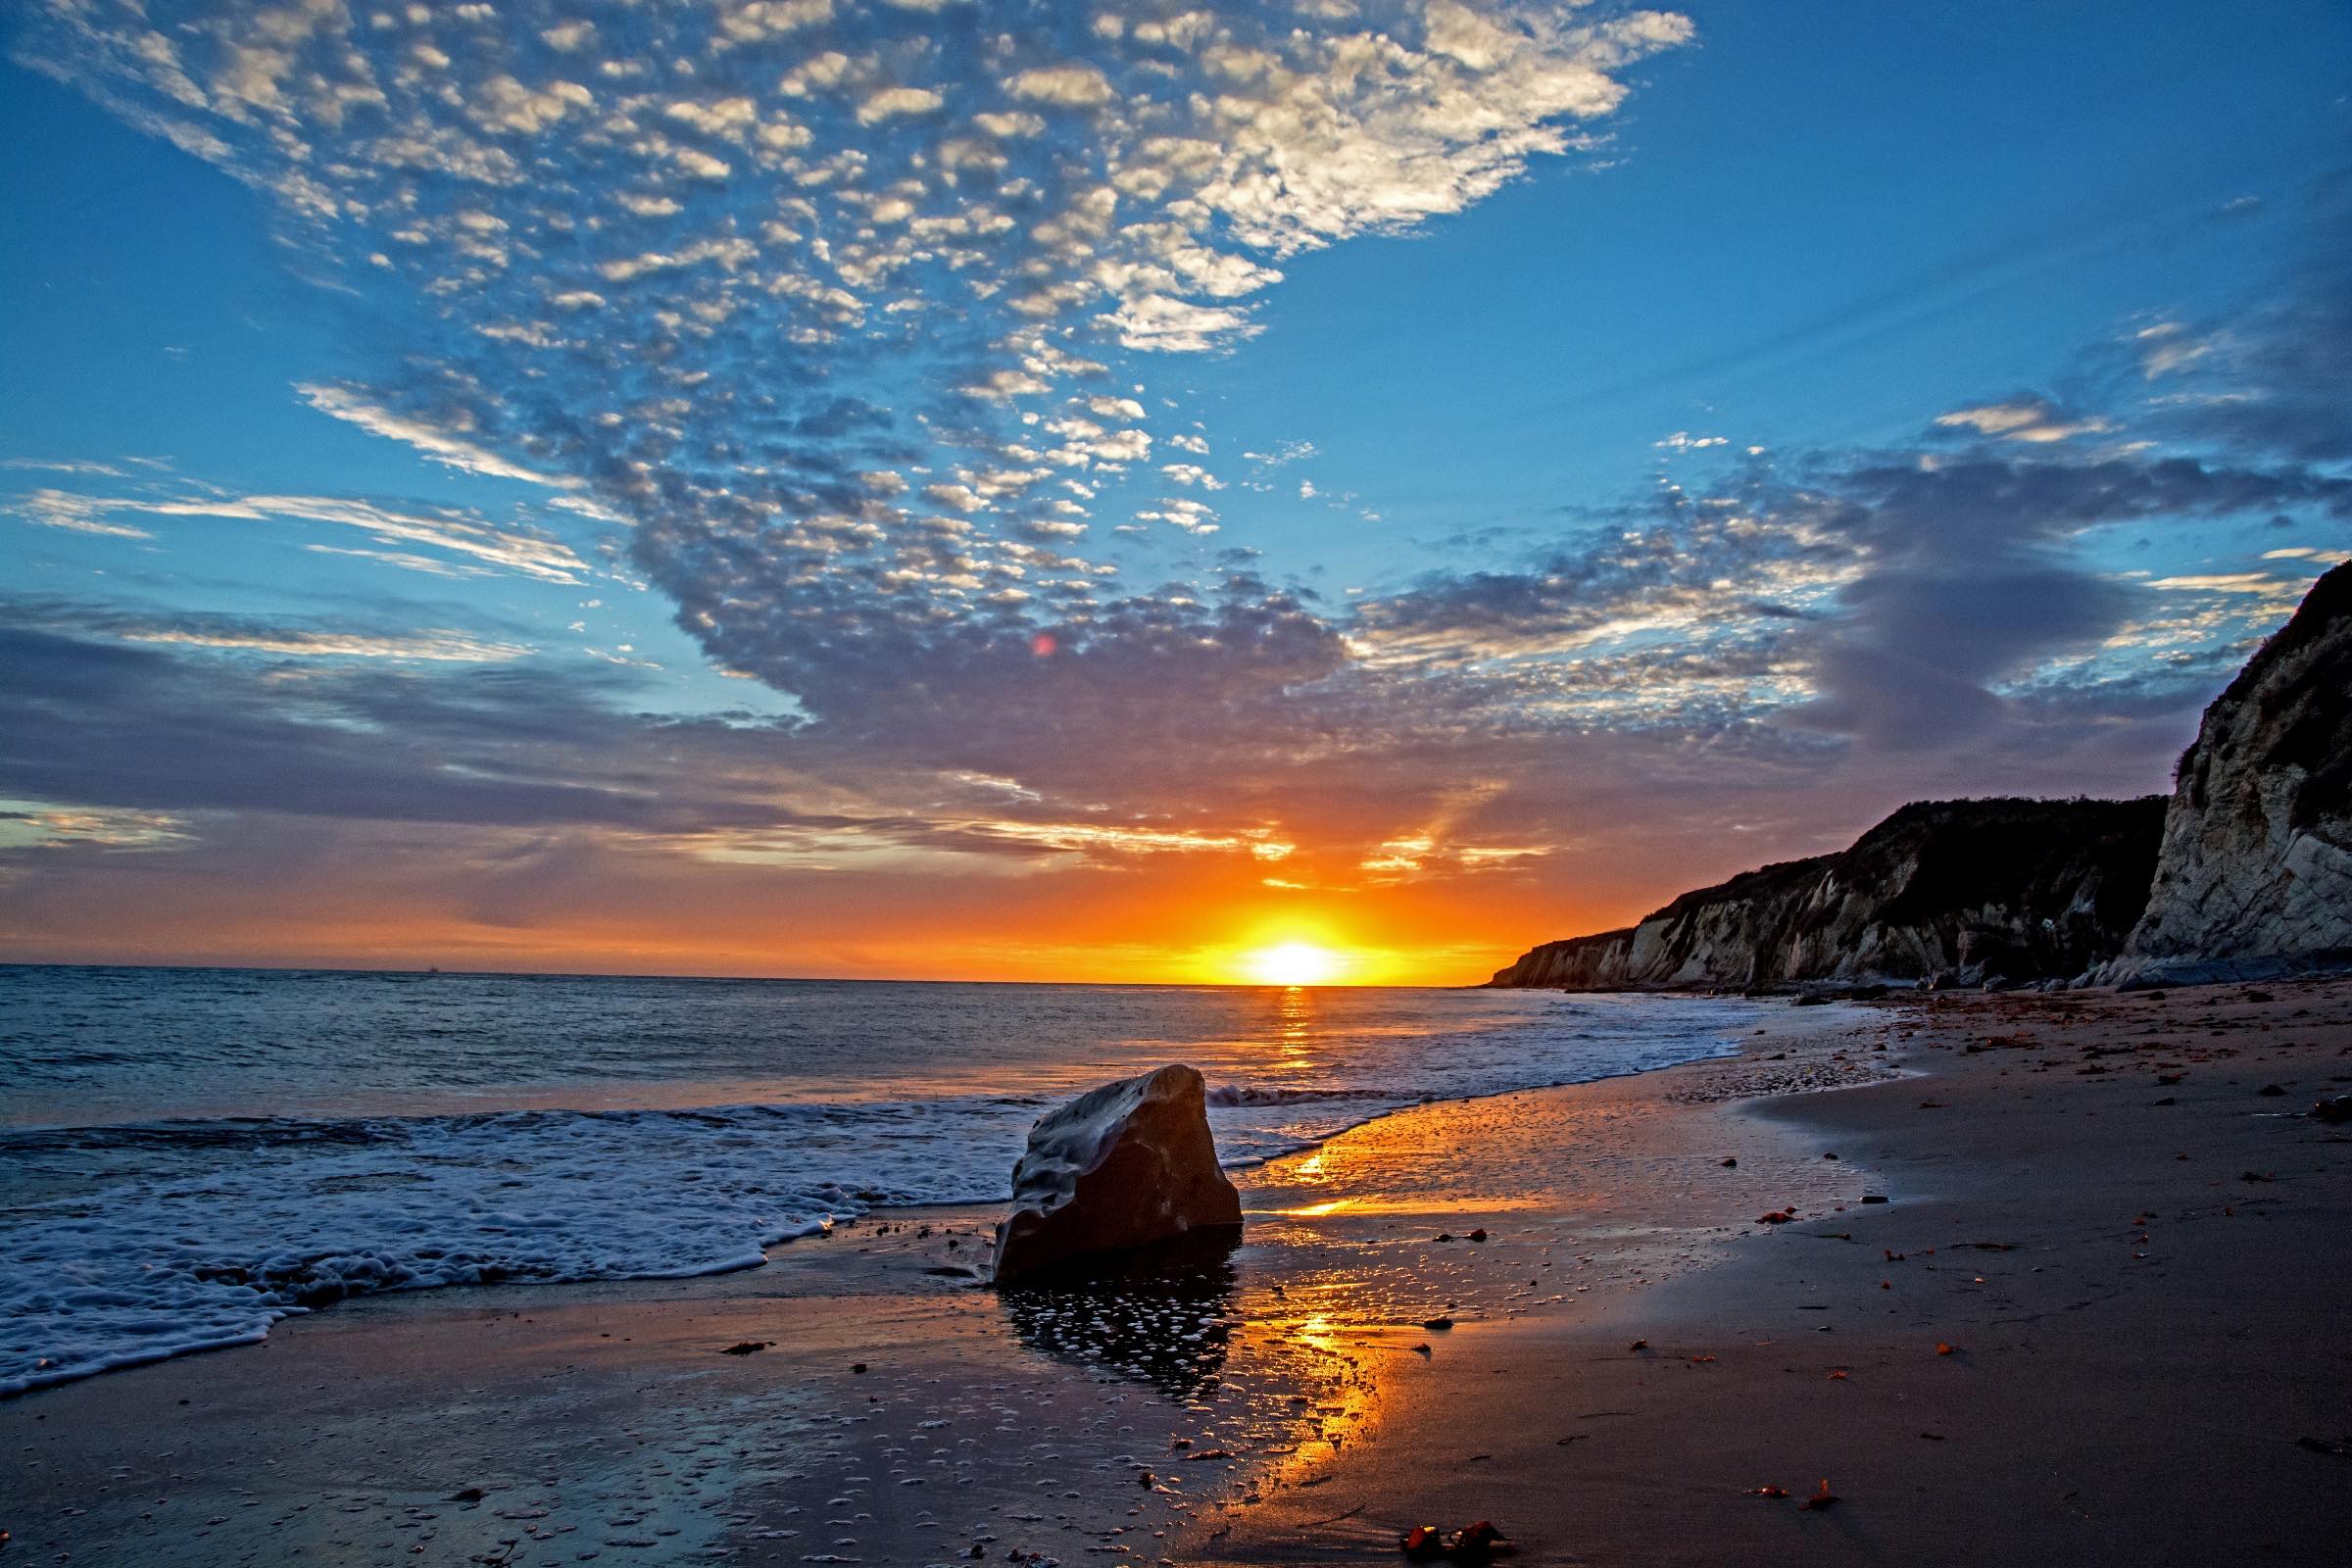 About Time: You Discovered the Best Beaches in California, USA